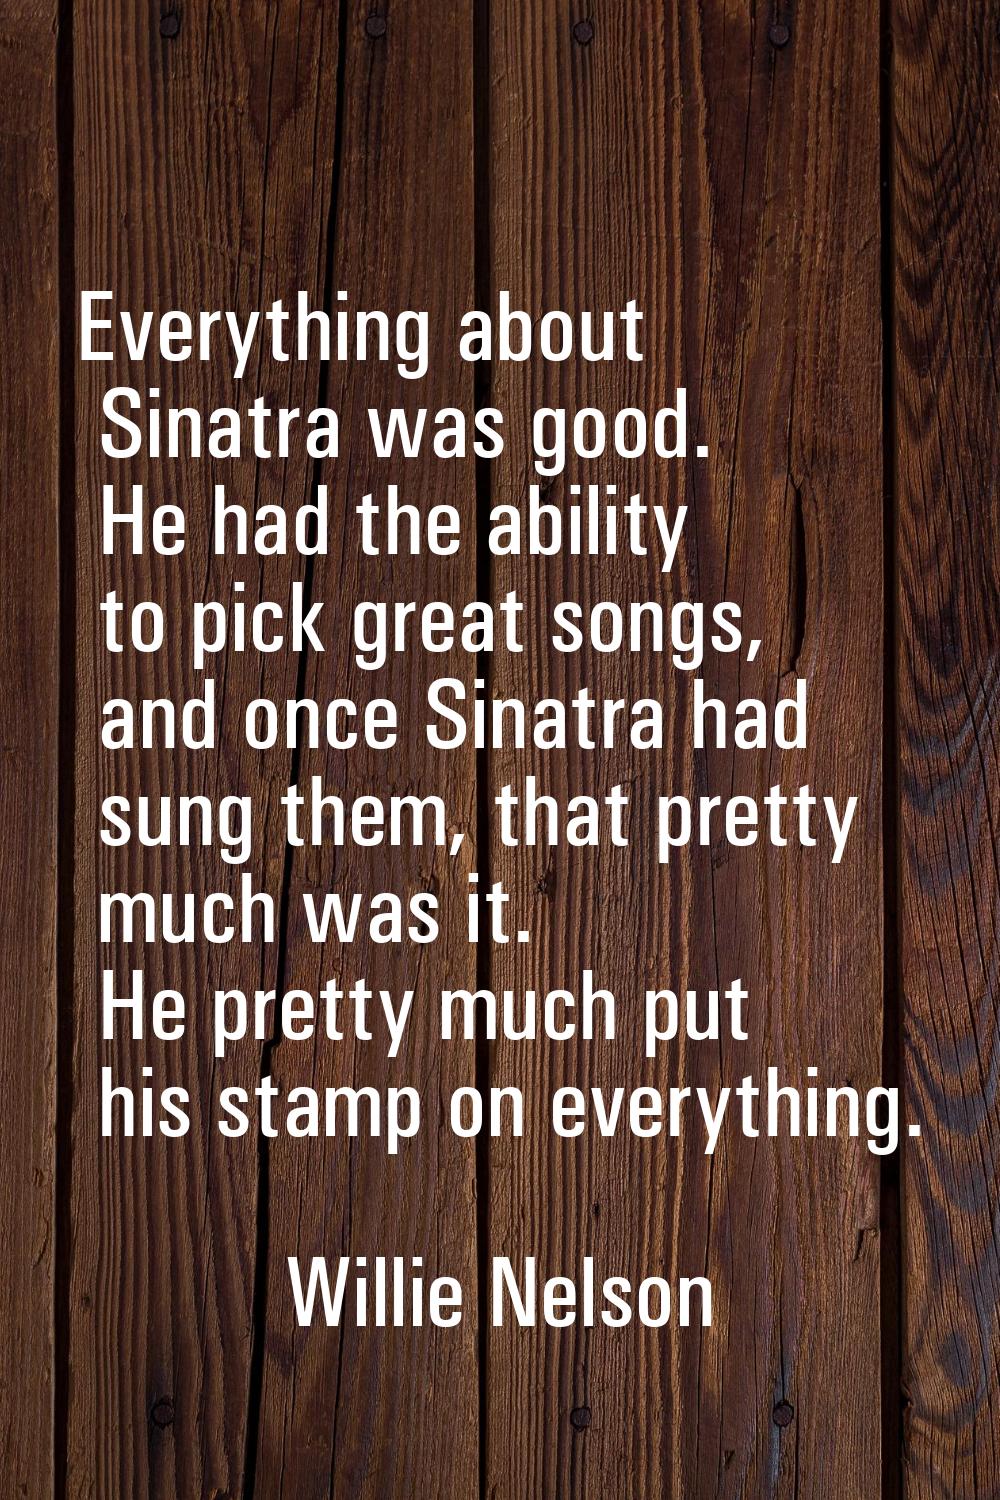 Everything about Sinatra was good. He had the ability to pick great songs, and once Sinatra had sun